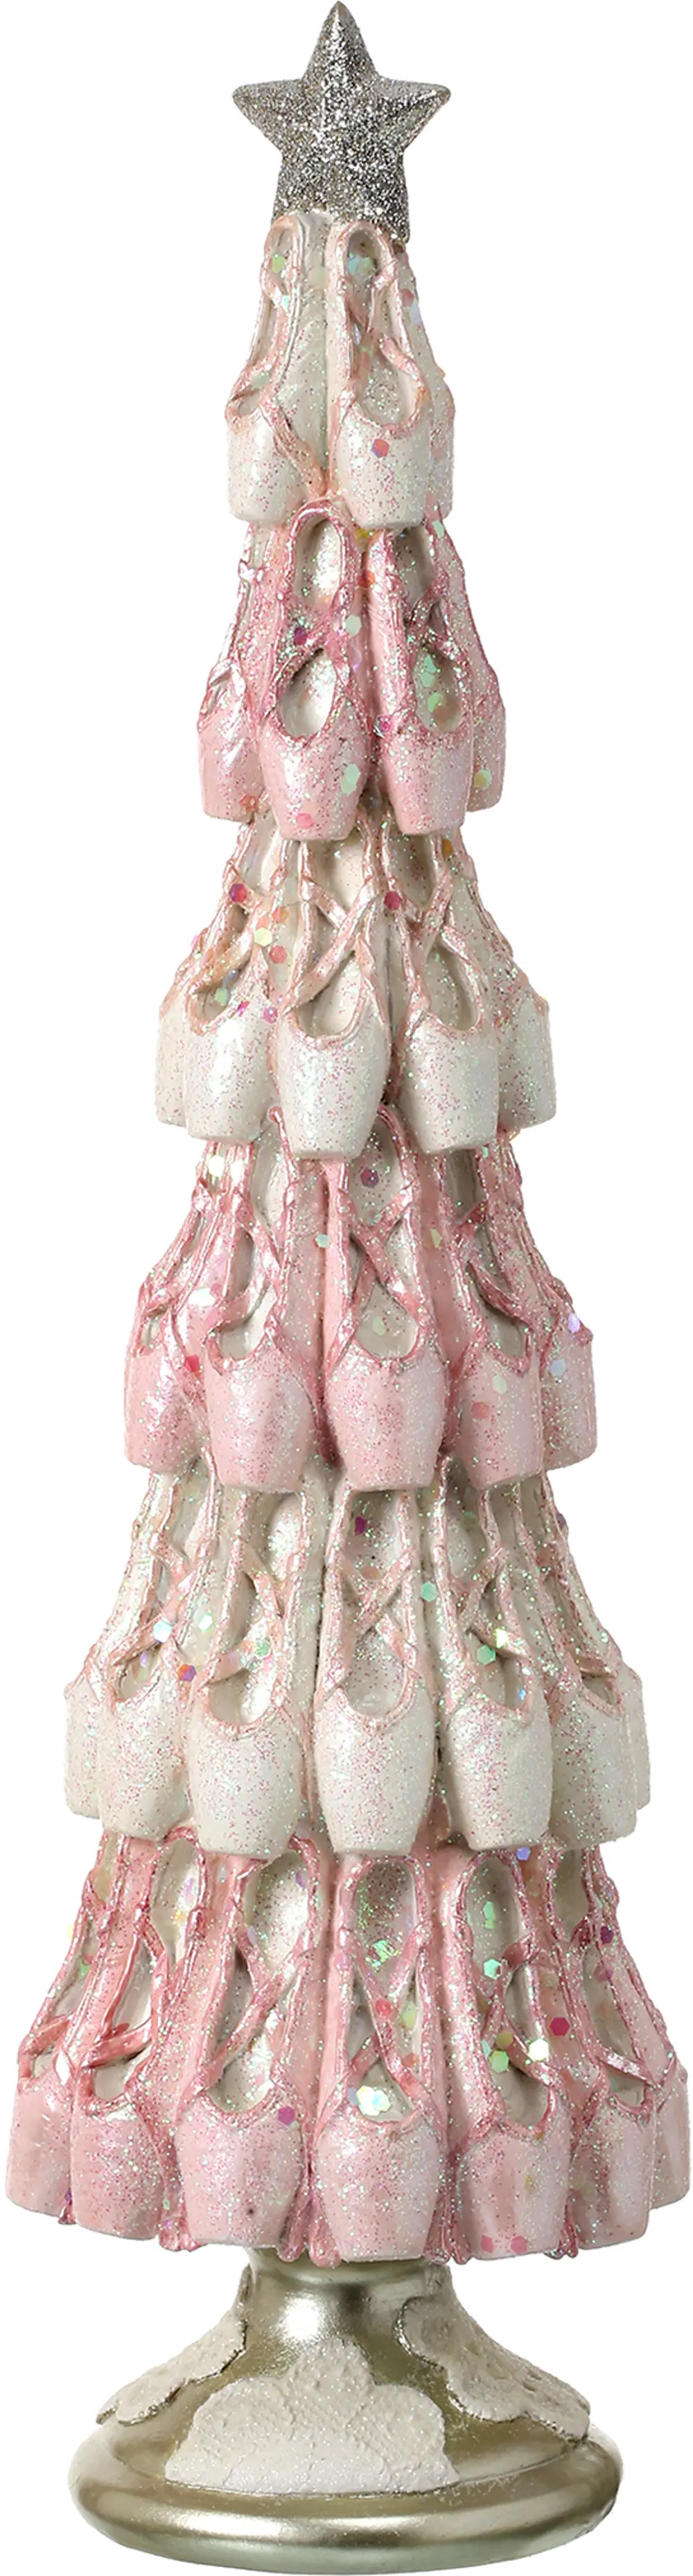 17 Inch Cream and Pink Ballet Slipper Tree-1